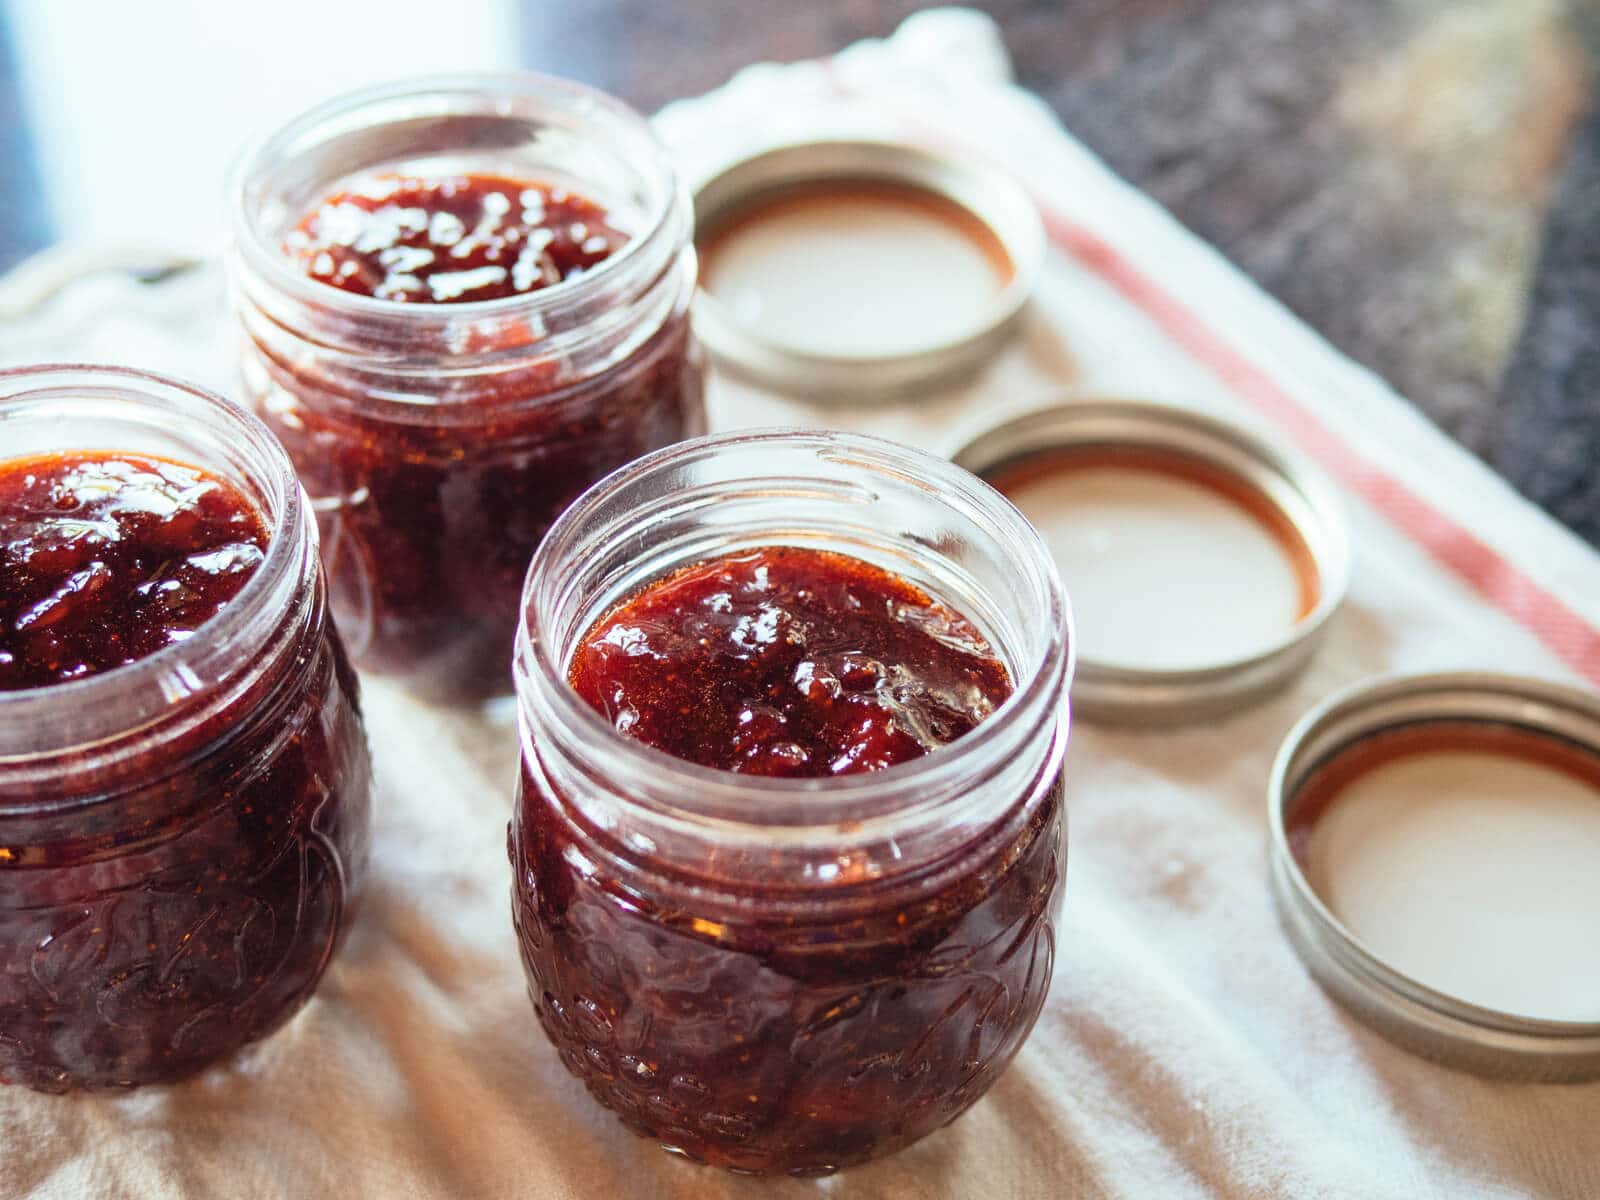 You don't need to preheat lids before canning